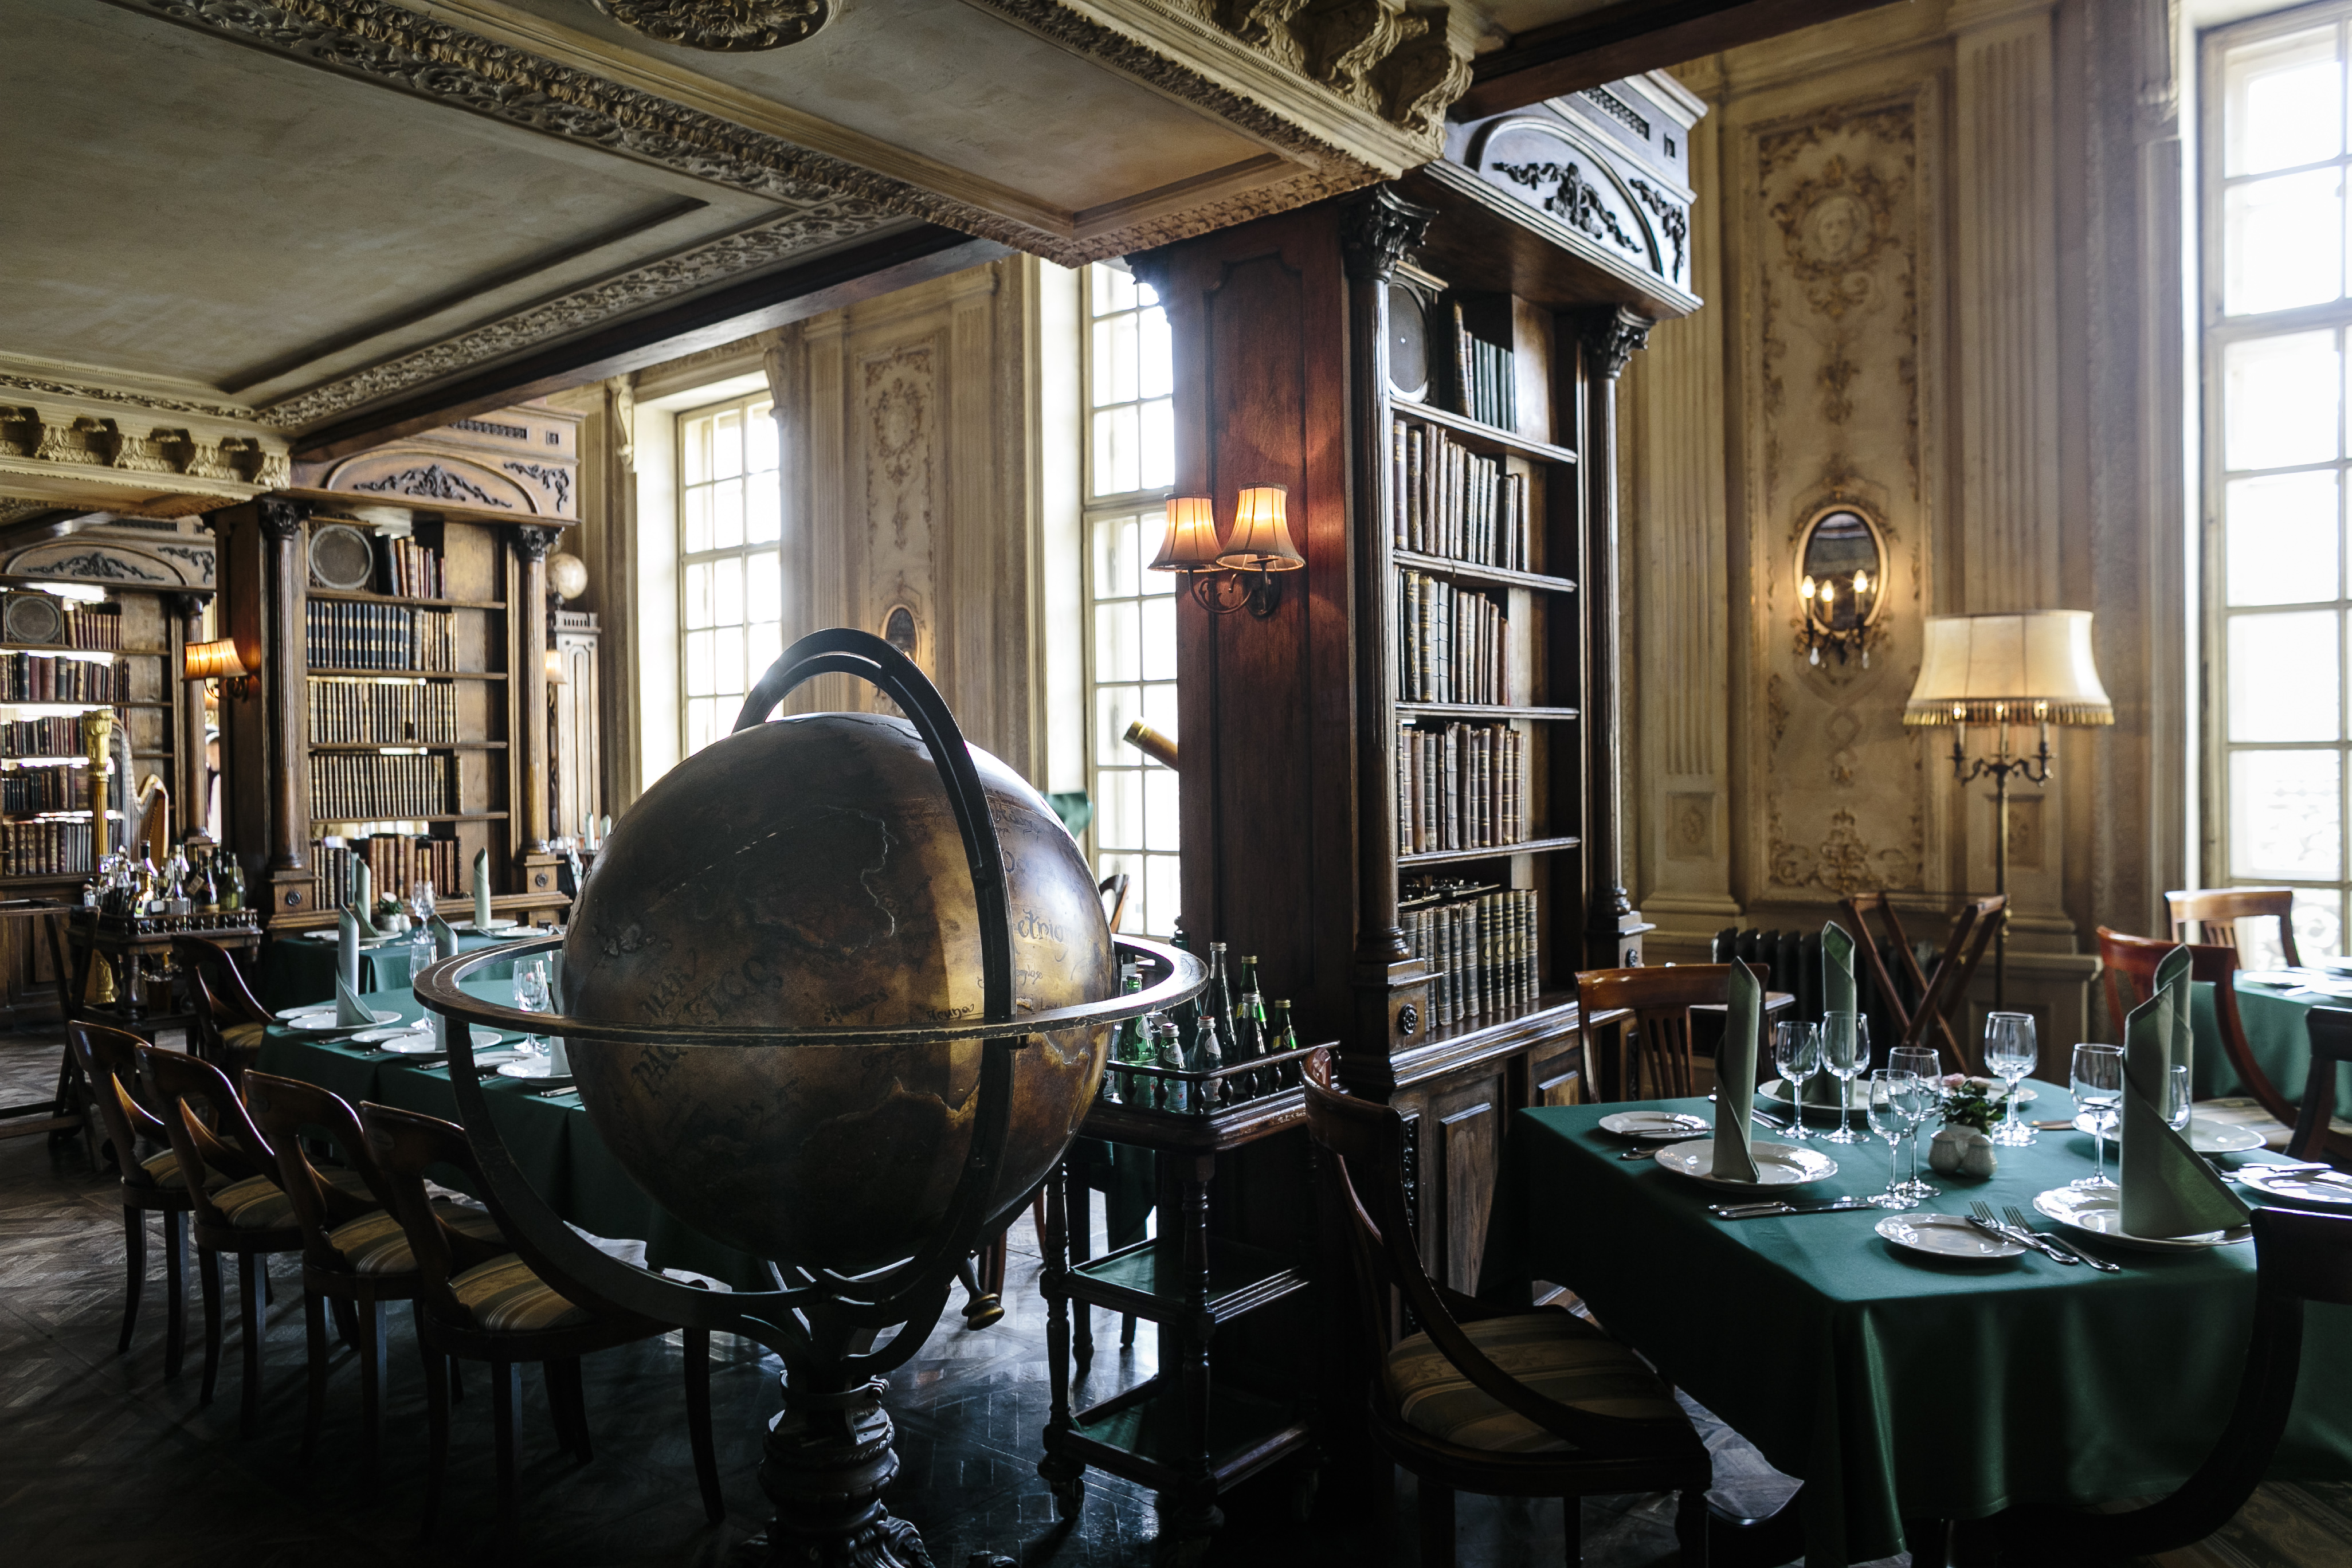 Located in the heart of the city in a Baroque mansion on Tverskoi Boulevard, Café Pushkin attracts both Russia's sophisticated beau monde and curious foreign tourists.